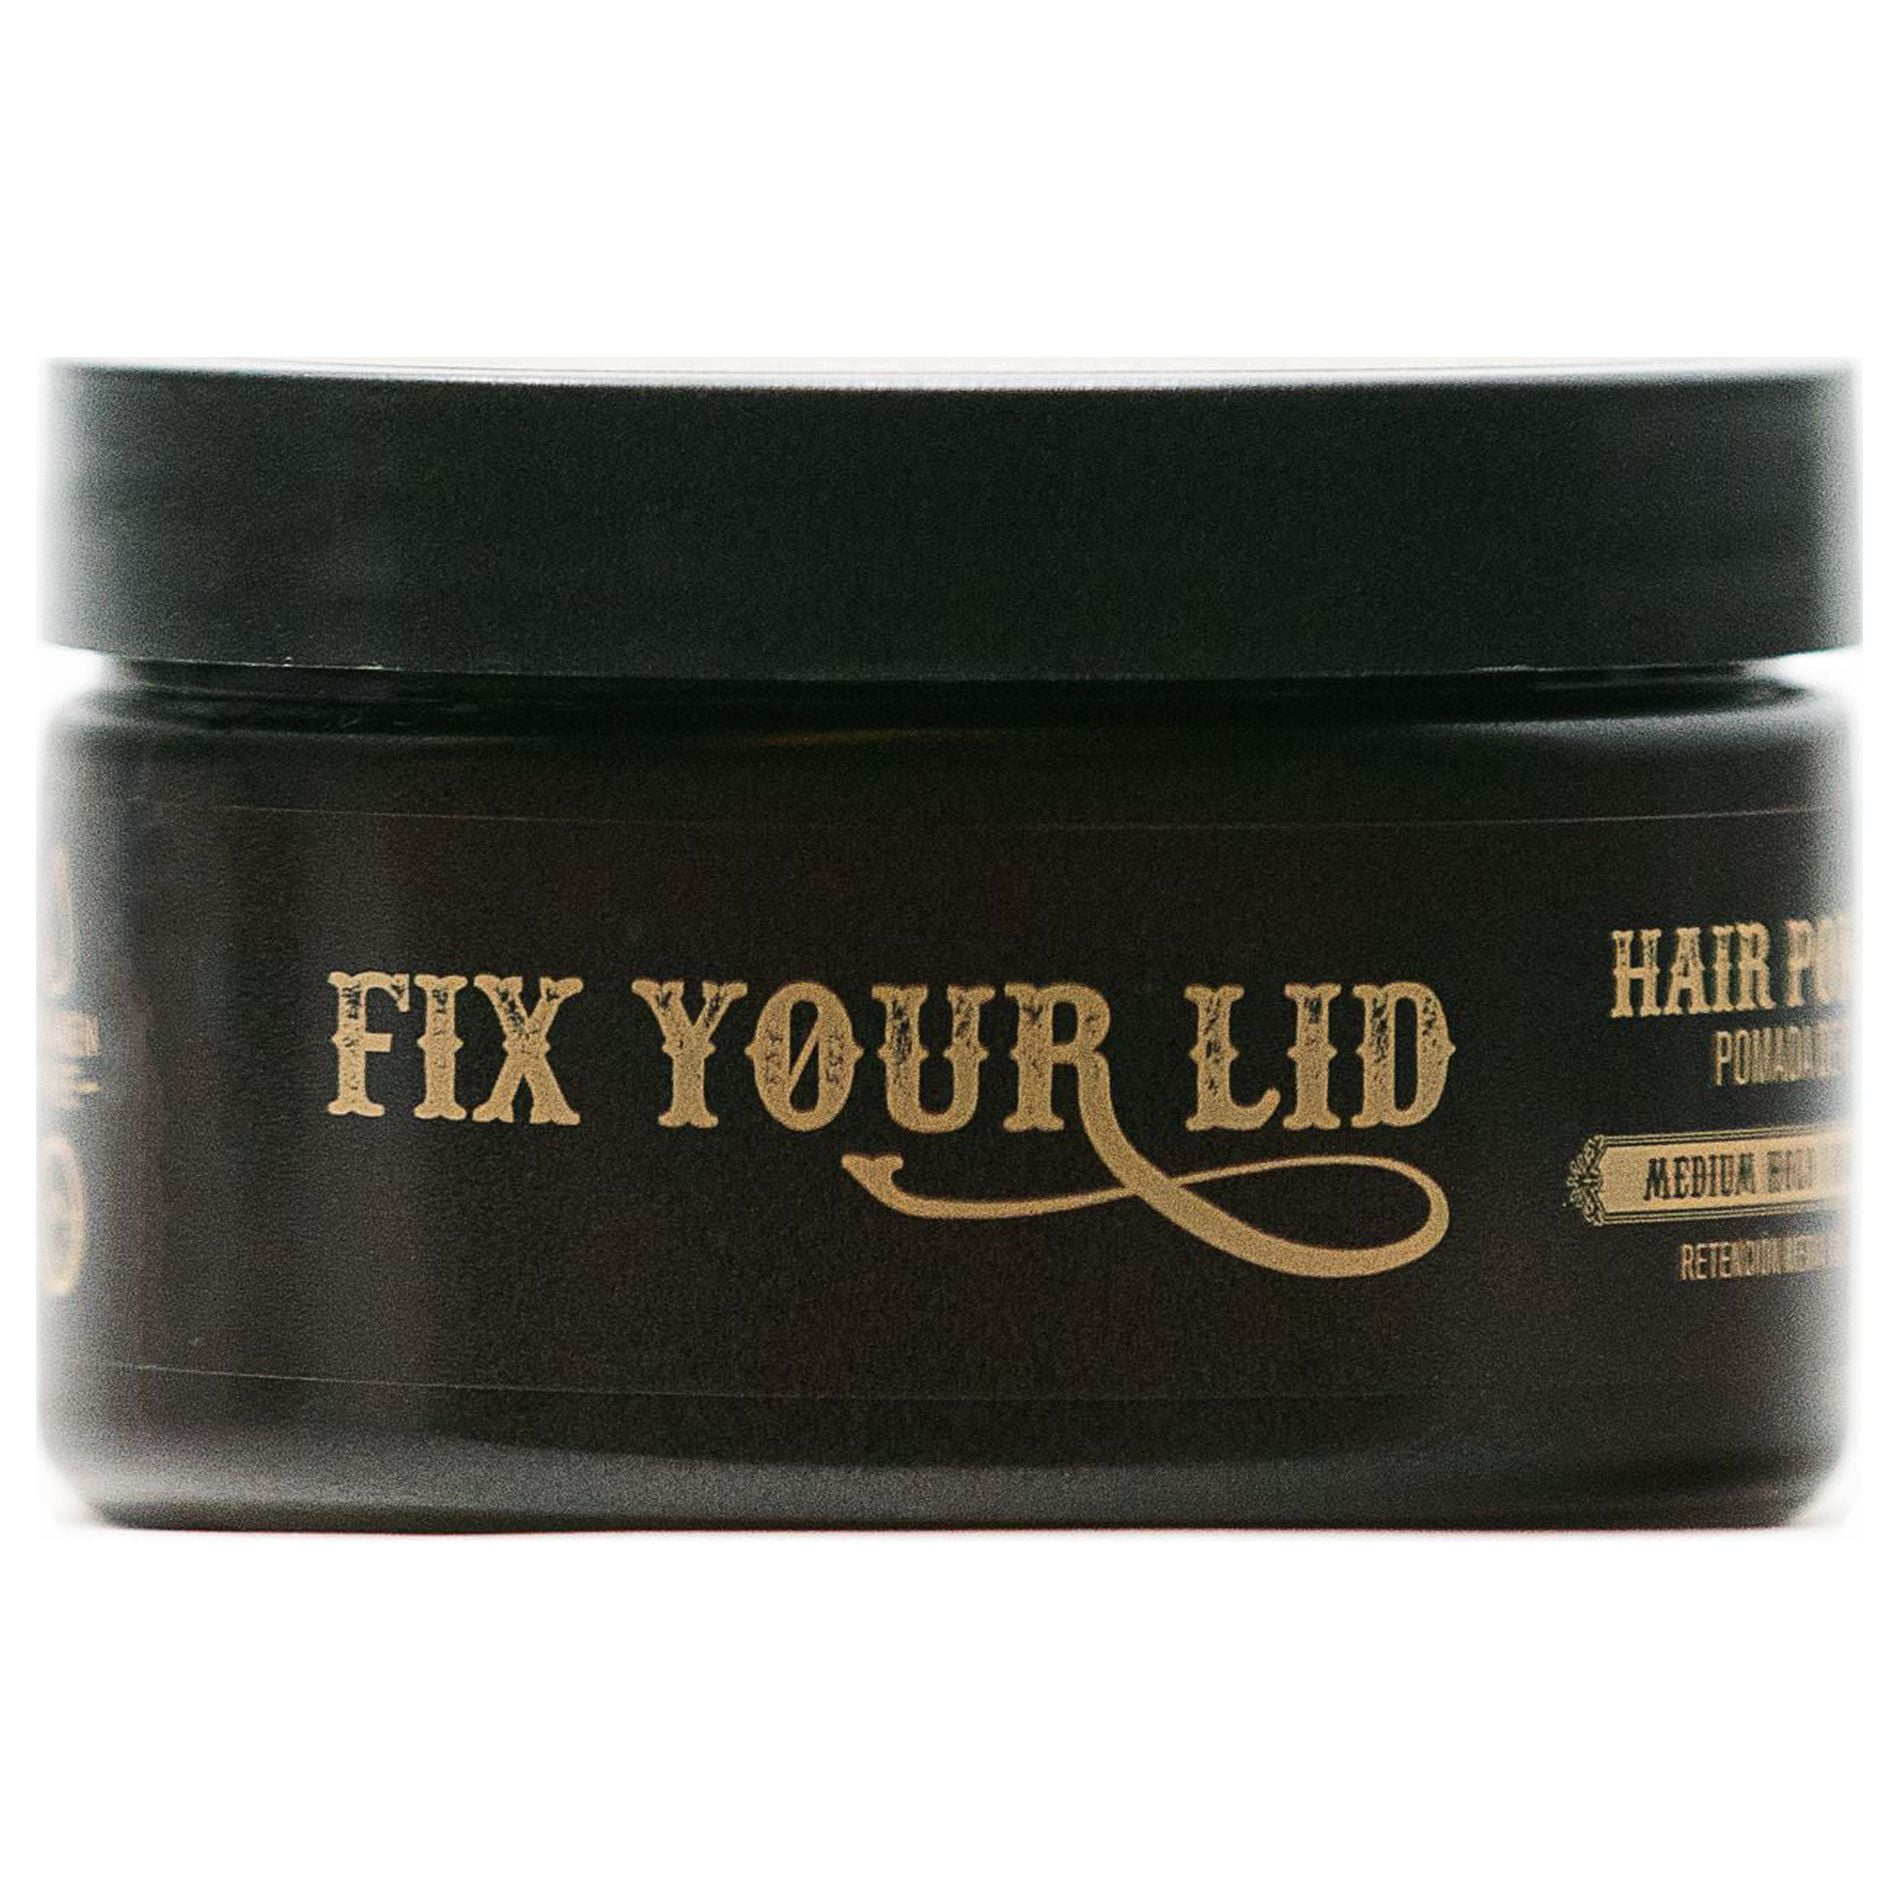  Fix Your Lid Extreme Hold Hair Pomade For Men - Hight